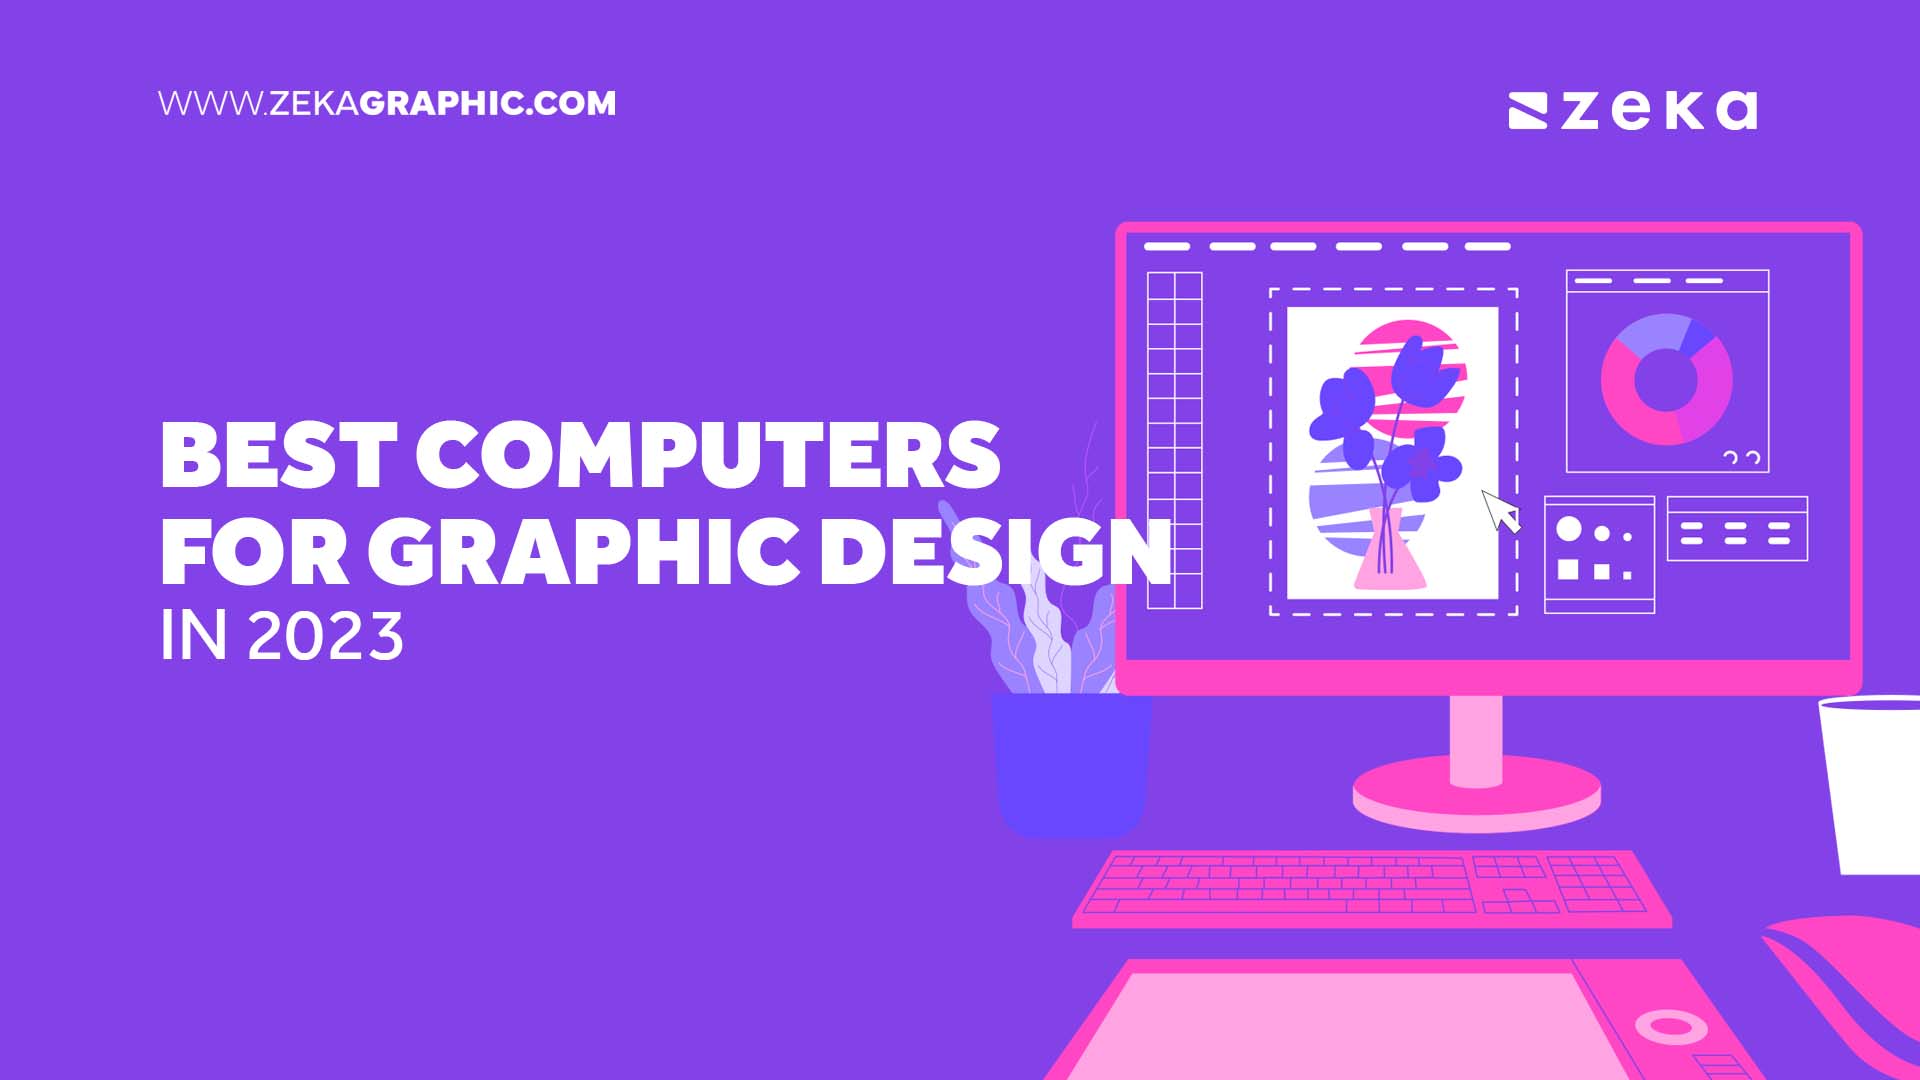 The Best Computers for Graphic Design (September 2023)